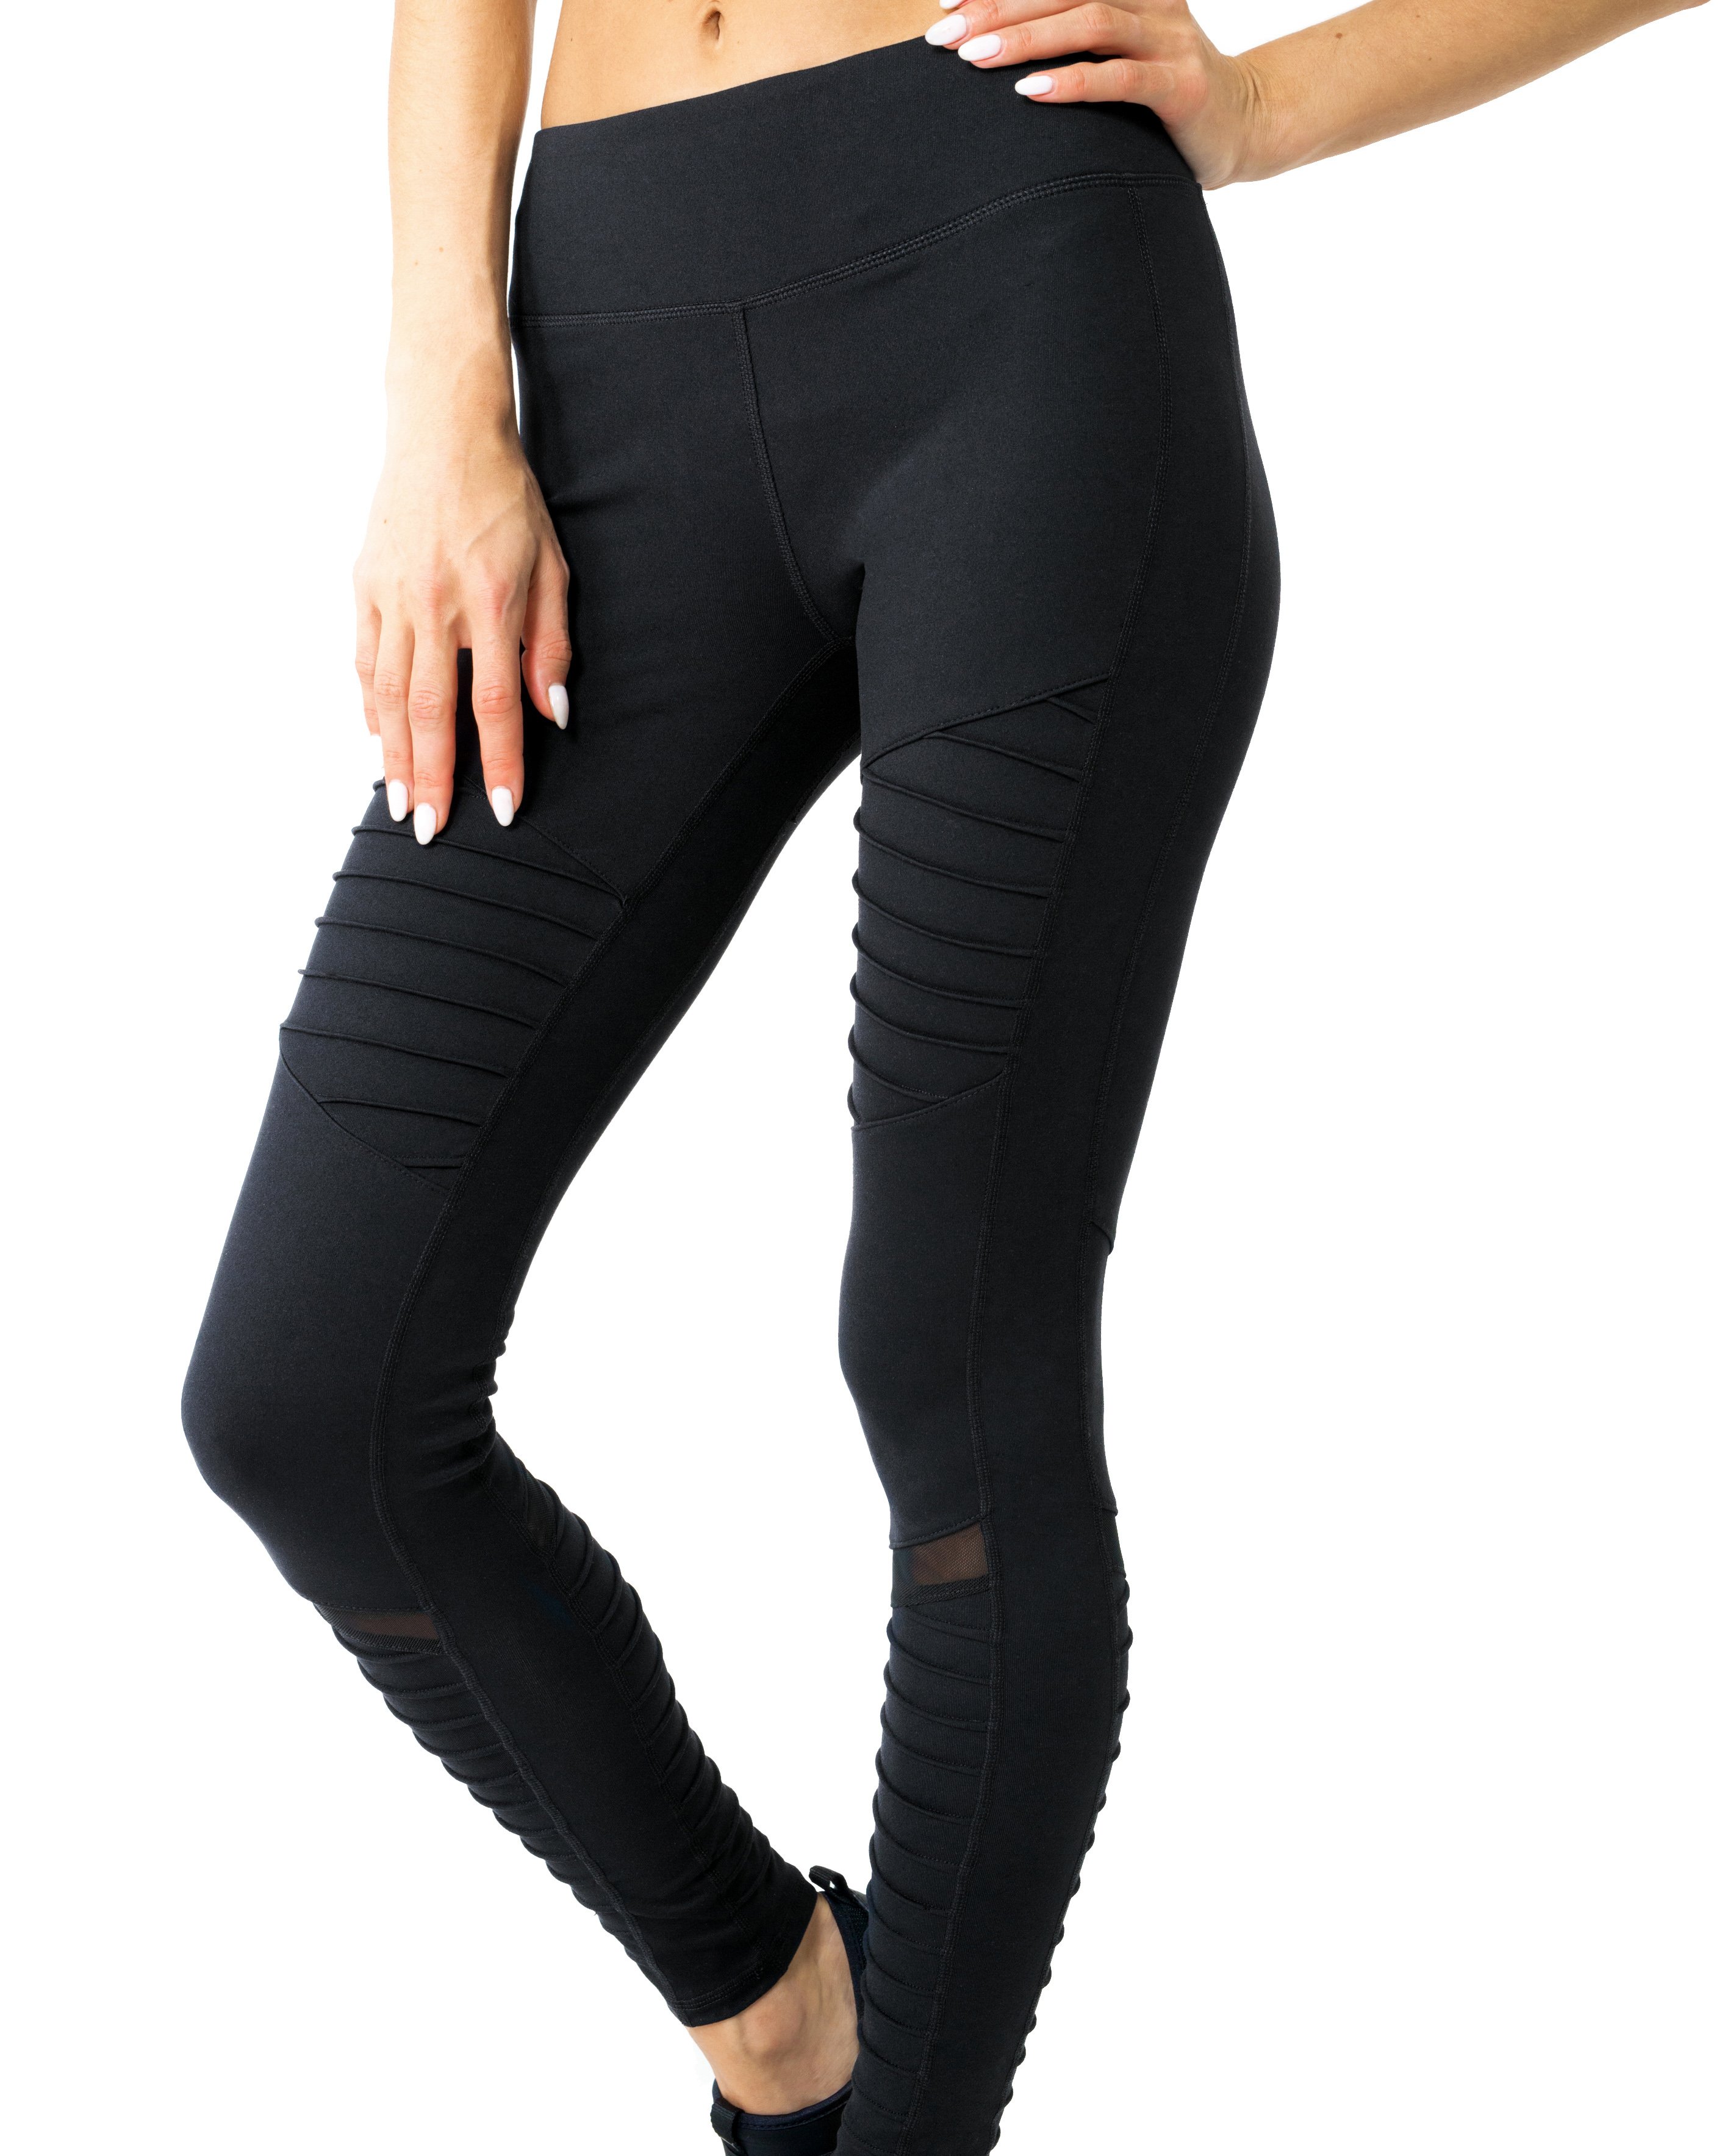 Stay Stylish and Comfortable During Workouts with Athletique Low-Waisted Ribbed Leggings